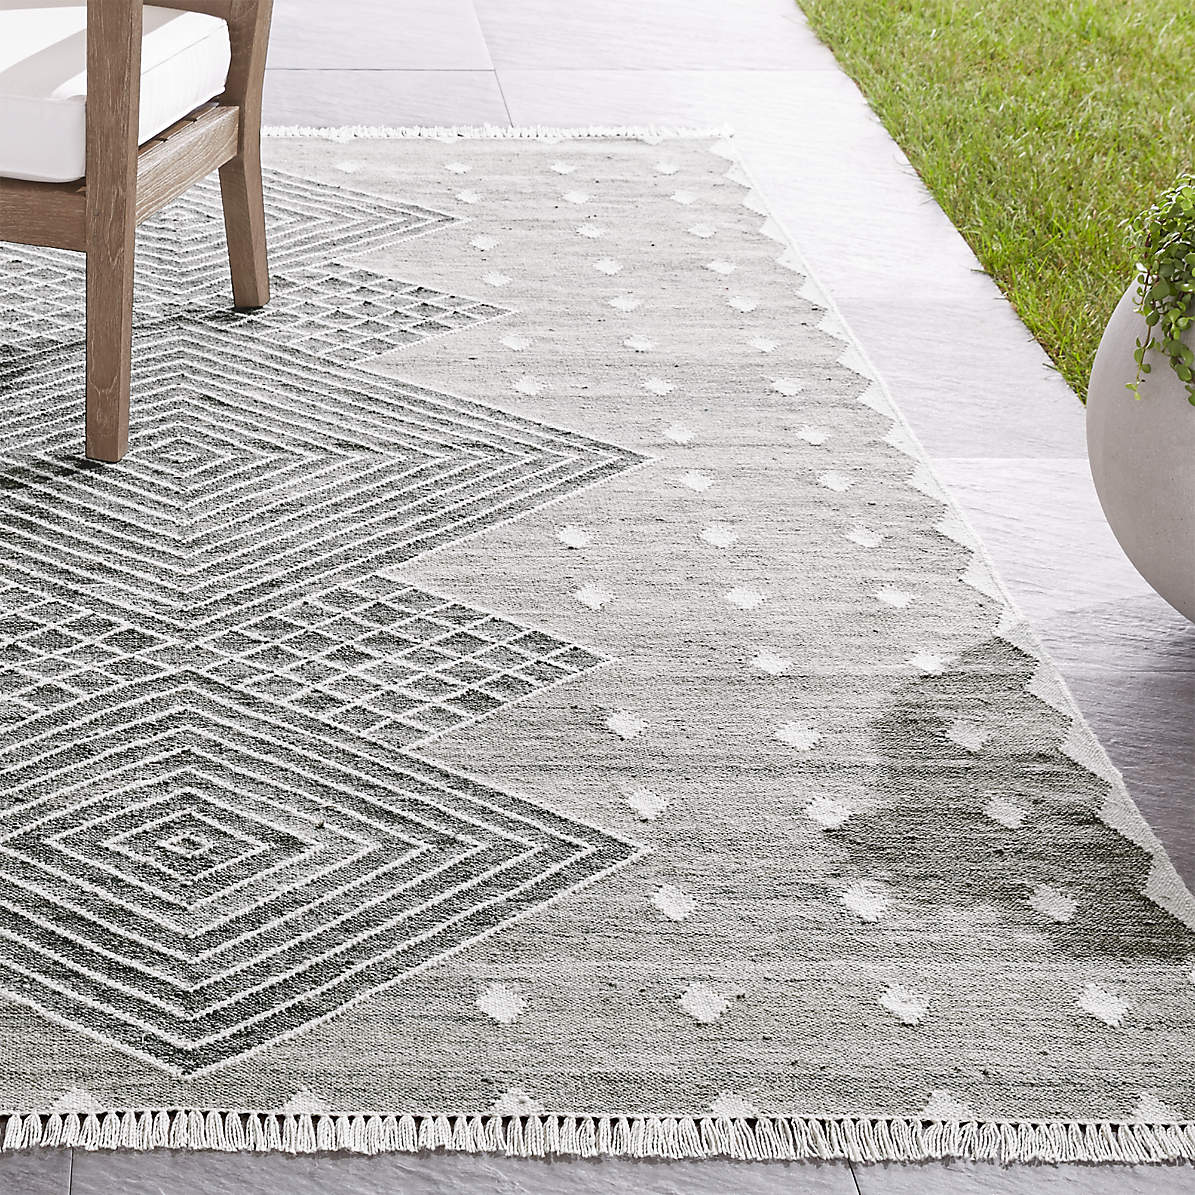 Ceri Grey Indoor Outdoor Rug Crate, How To Keep Outdoor Rugs In Place On Concrete Wall